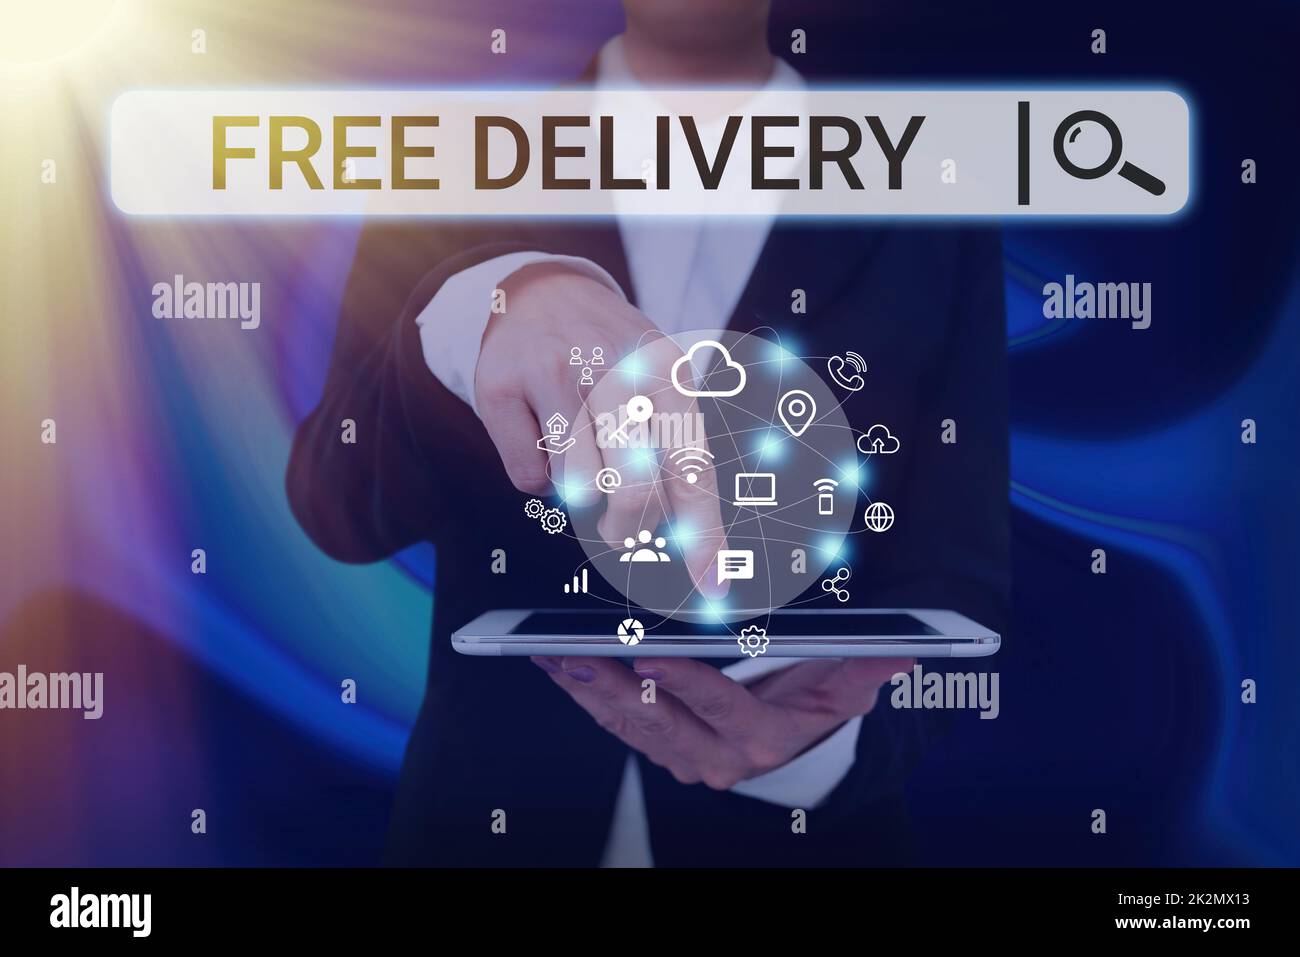 Inspiration showing sign Free Delivery. Word Written on Shipping Package Cargo Courier Distribution Center Fragile Lady Pressing Screen Of Mobile Phone Showing The Futuristic Technology Stock Photo